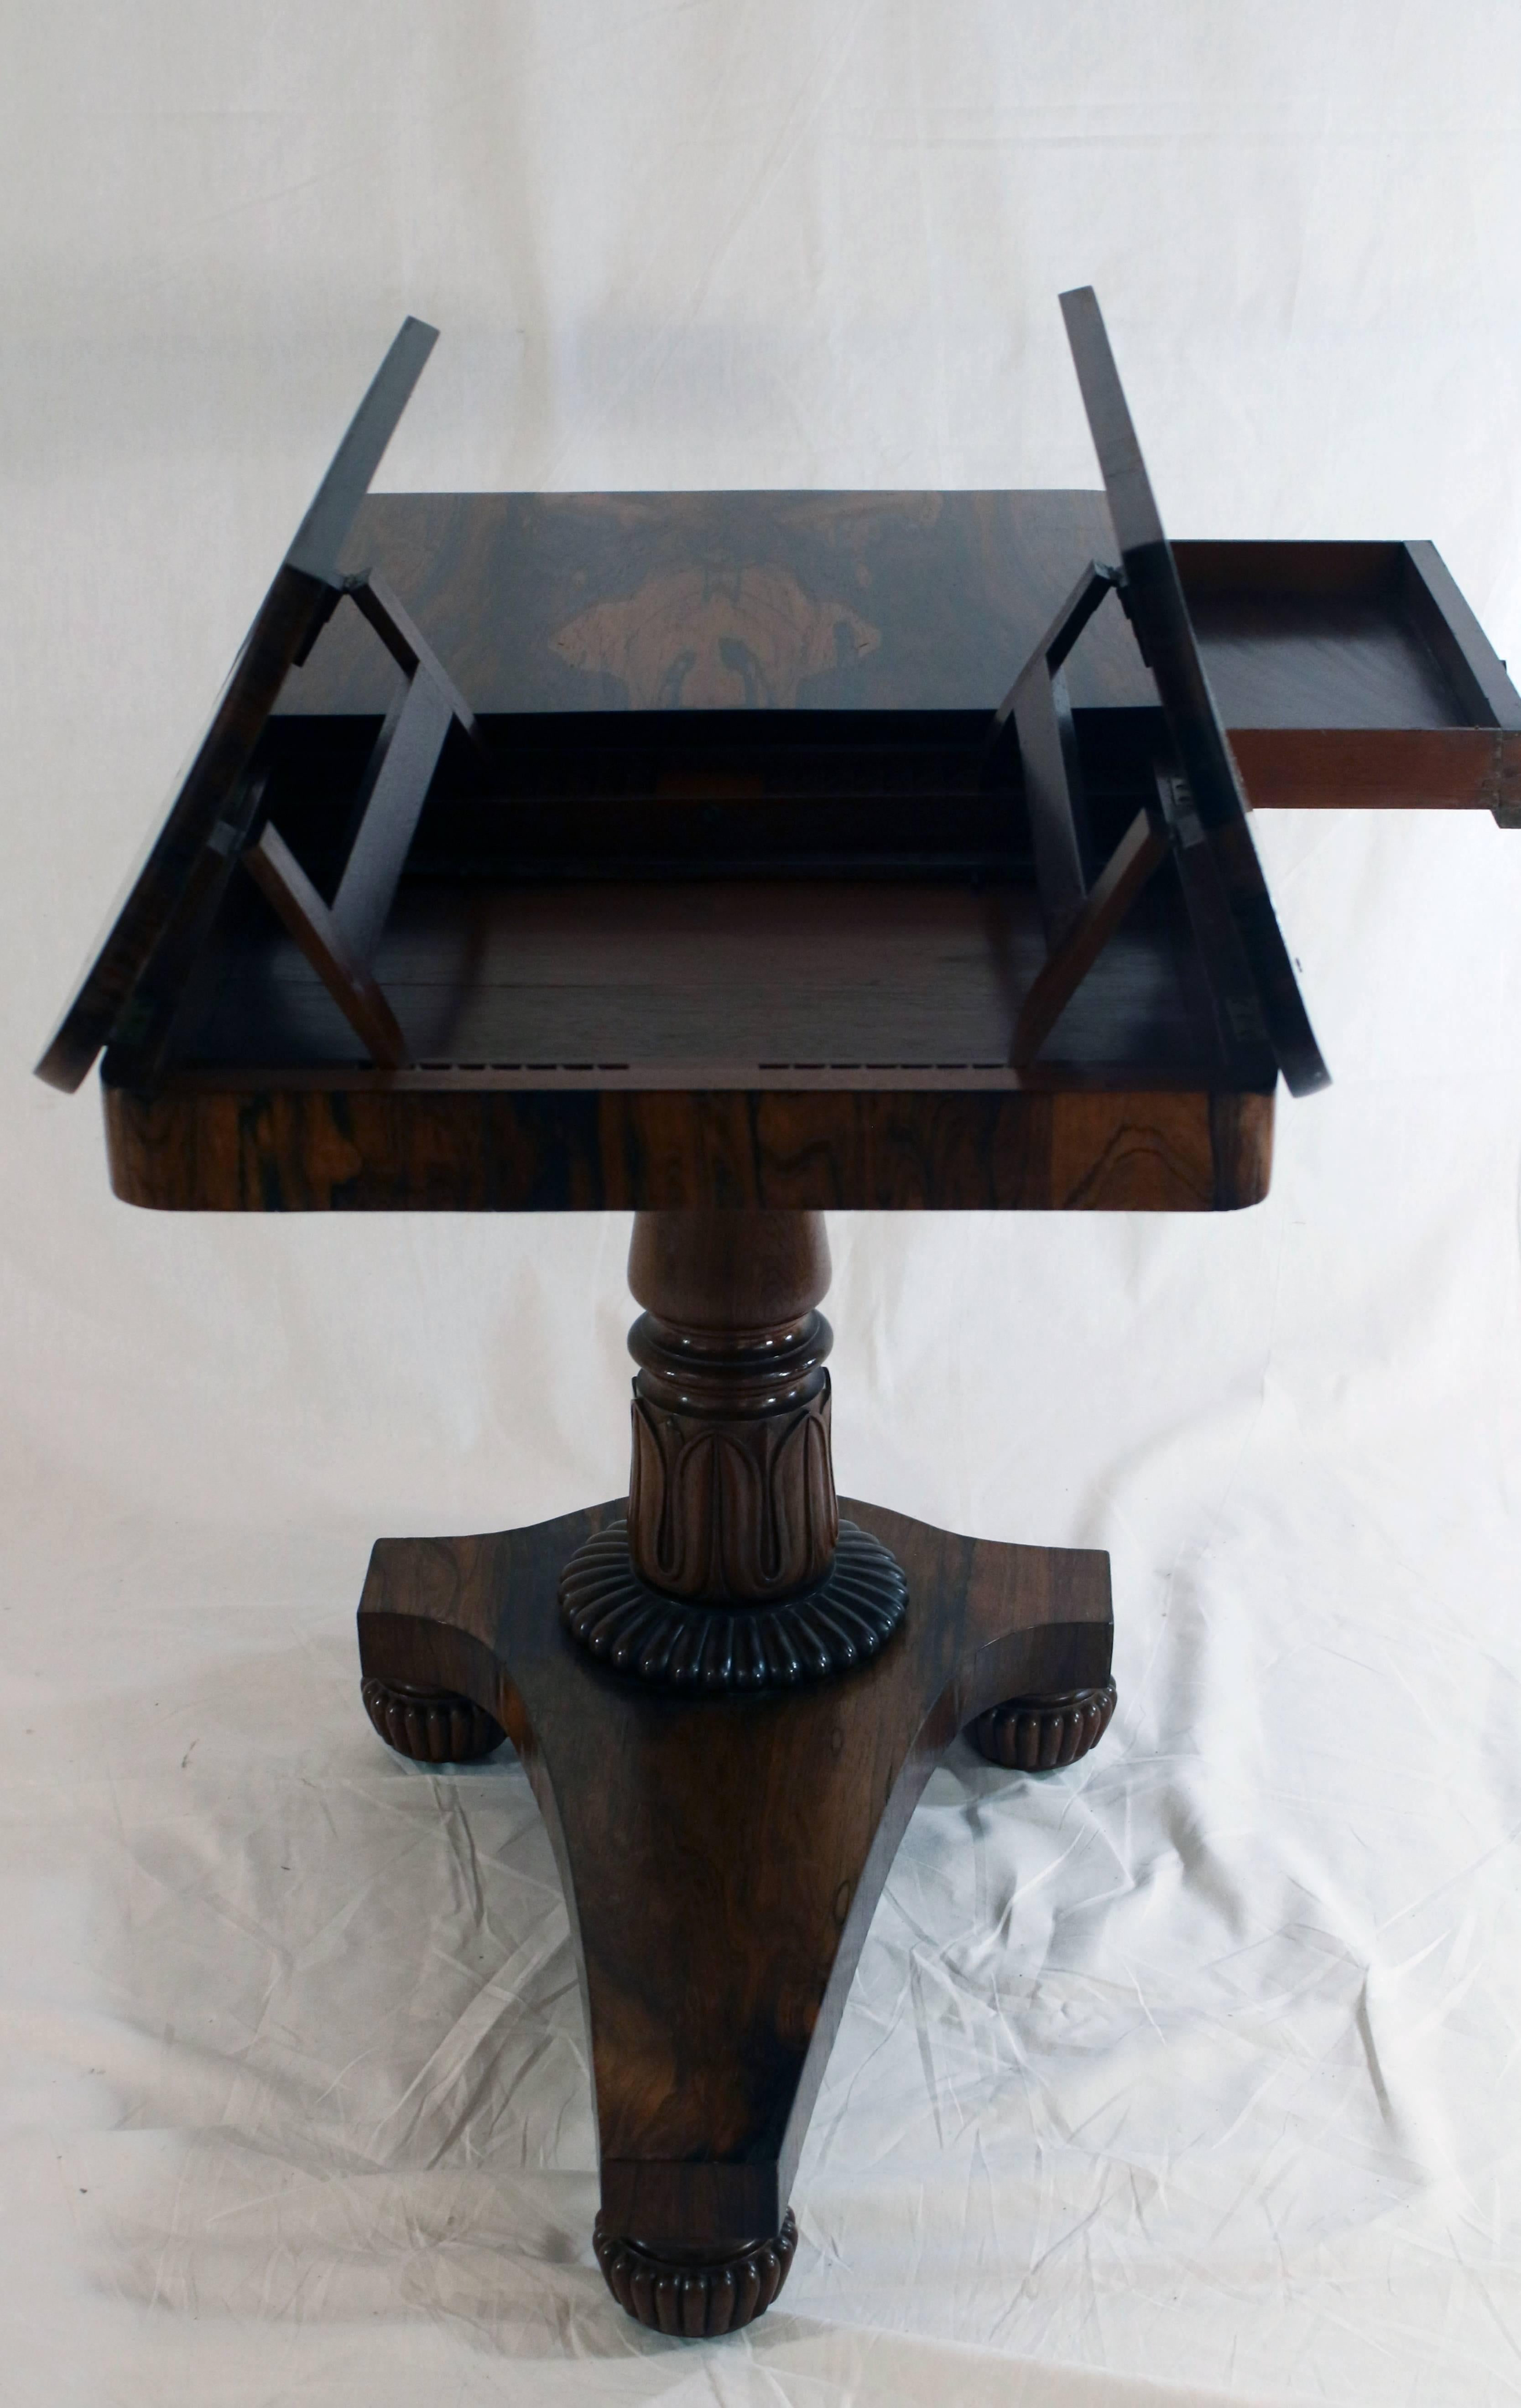 English carved rosewood duo angle adjustable bookrest reading table in the Regency style on ratchet-cantilevered base with single drawer, circa 1840. This table was created to provide a stabile surface upon which to enjoy reading large books which